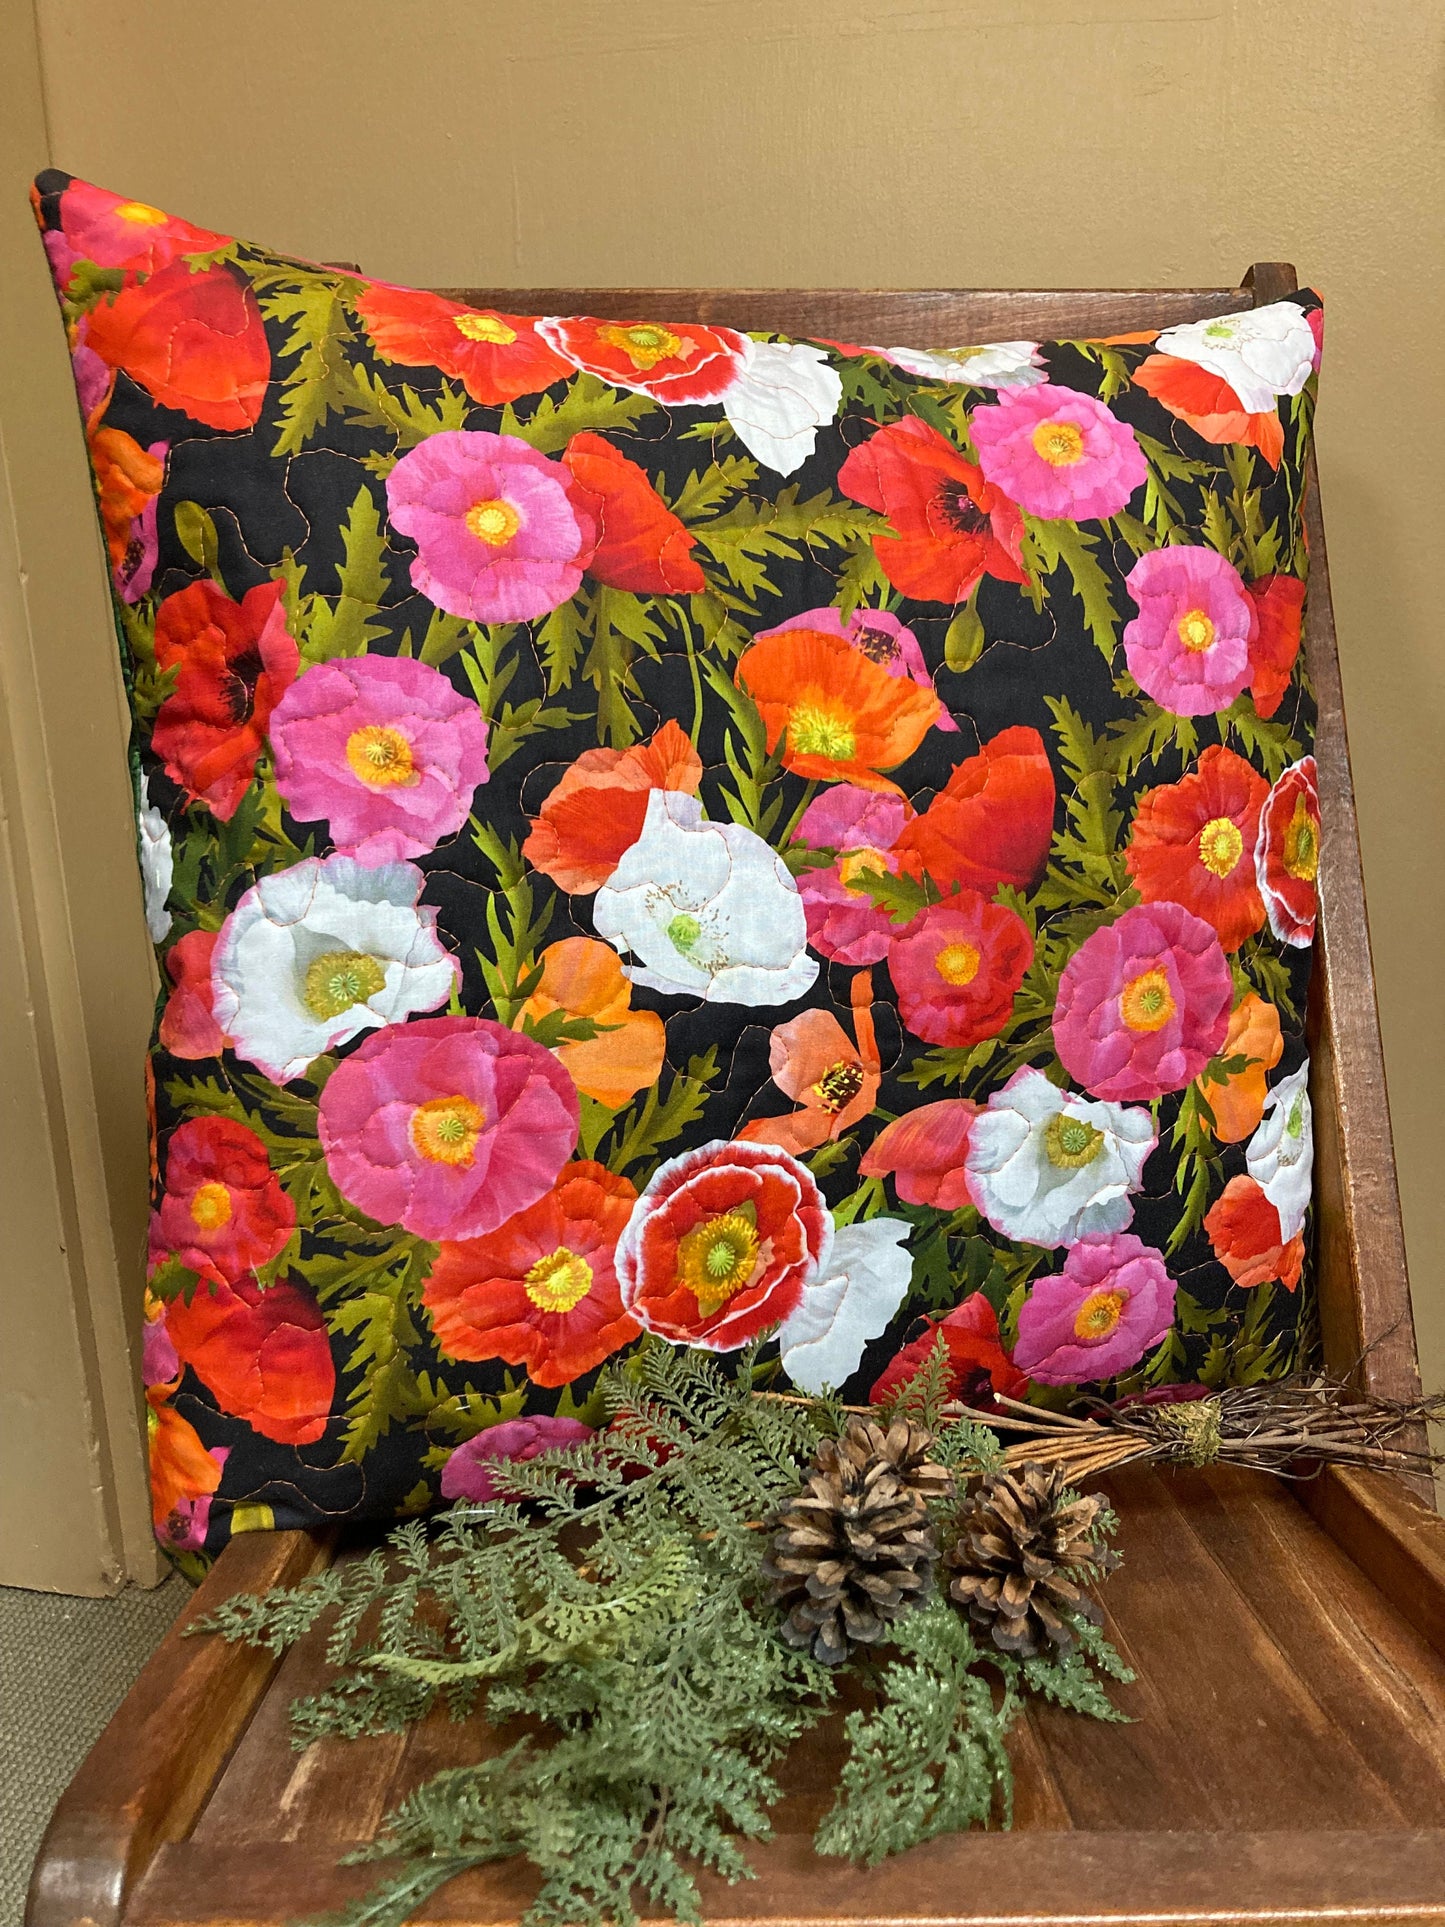 Red Orange Pink Poppy Quilted Fabric Art Pillow, Textile 18x18", Sofa Chair Bedroom Living Room Couch Designer Chic Red Bright Throw Pillow